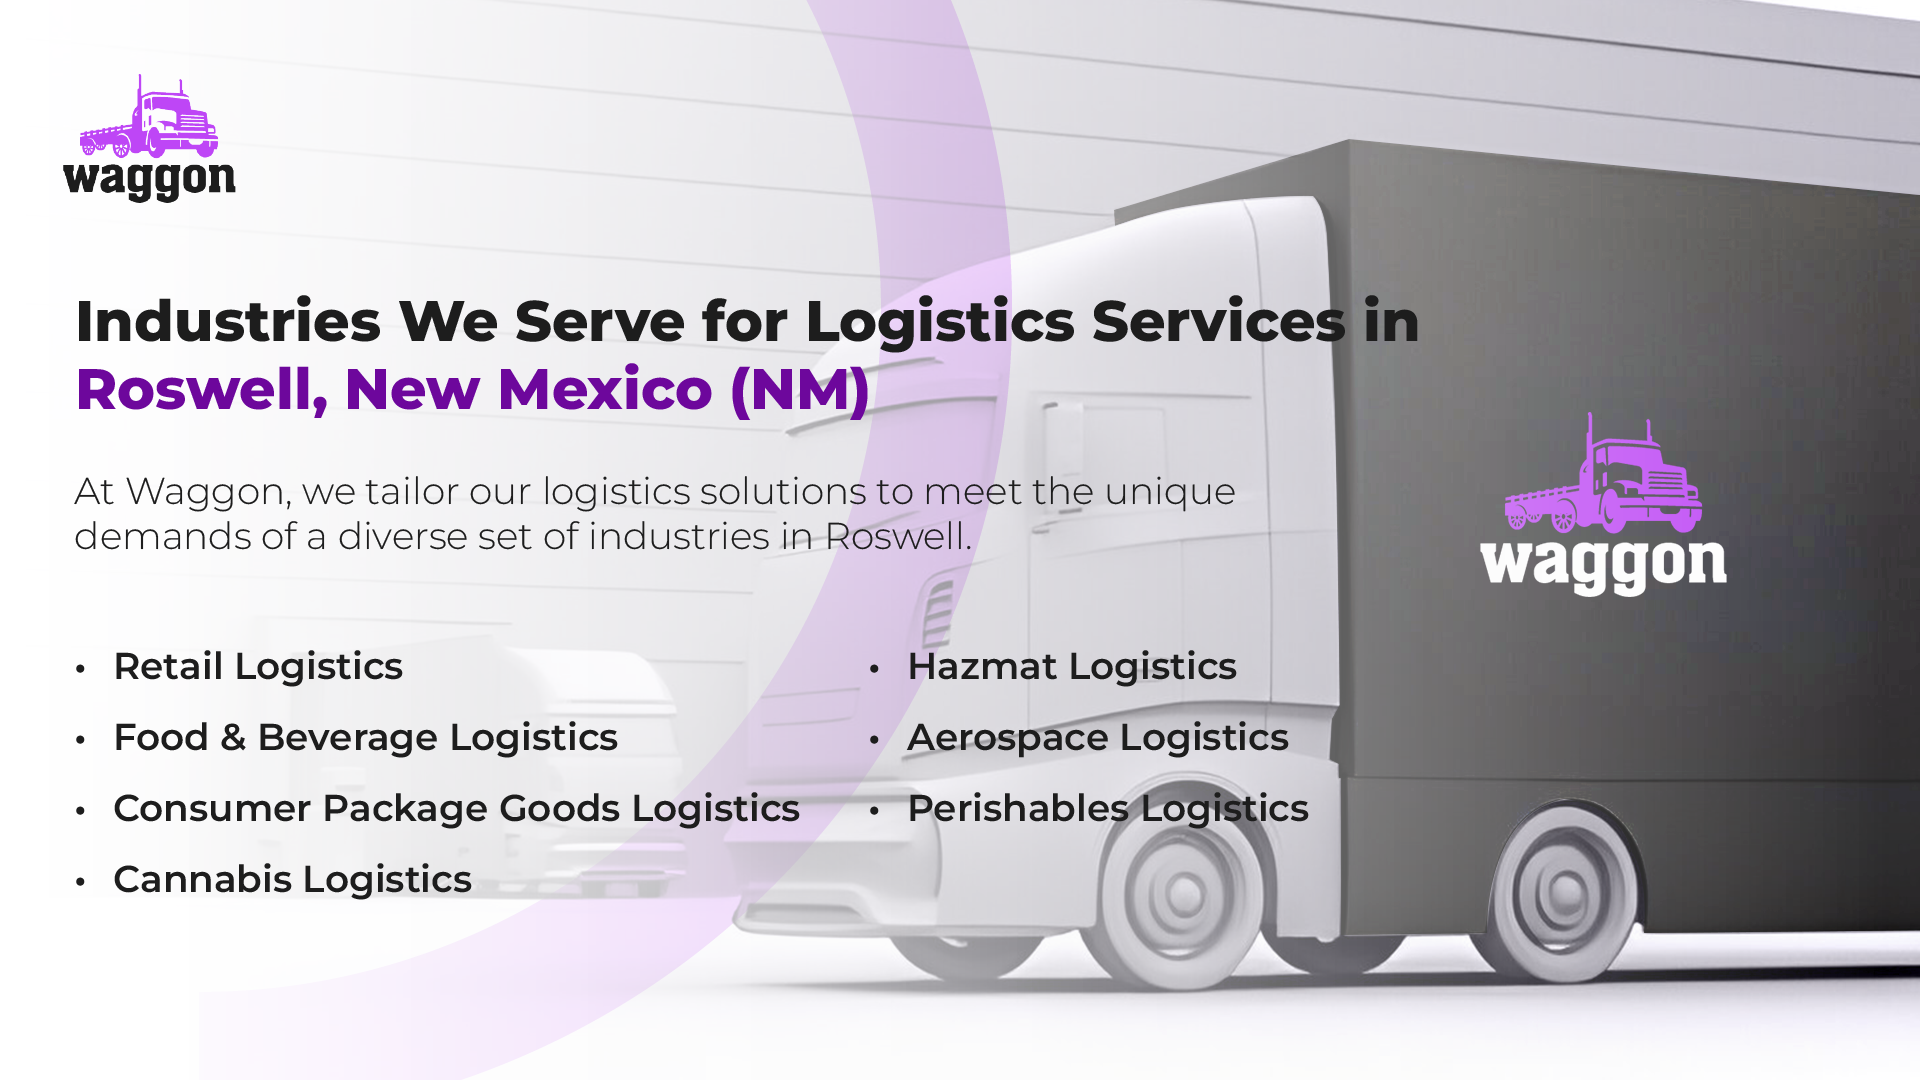 Industries We Serve for Logistics Services in Roswell, New Mexico (NM)